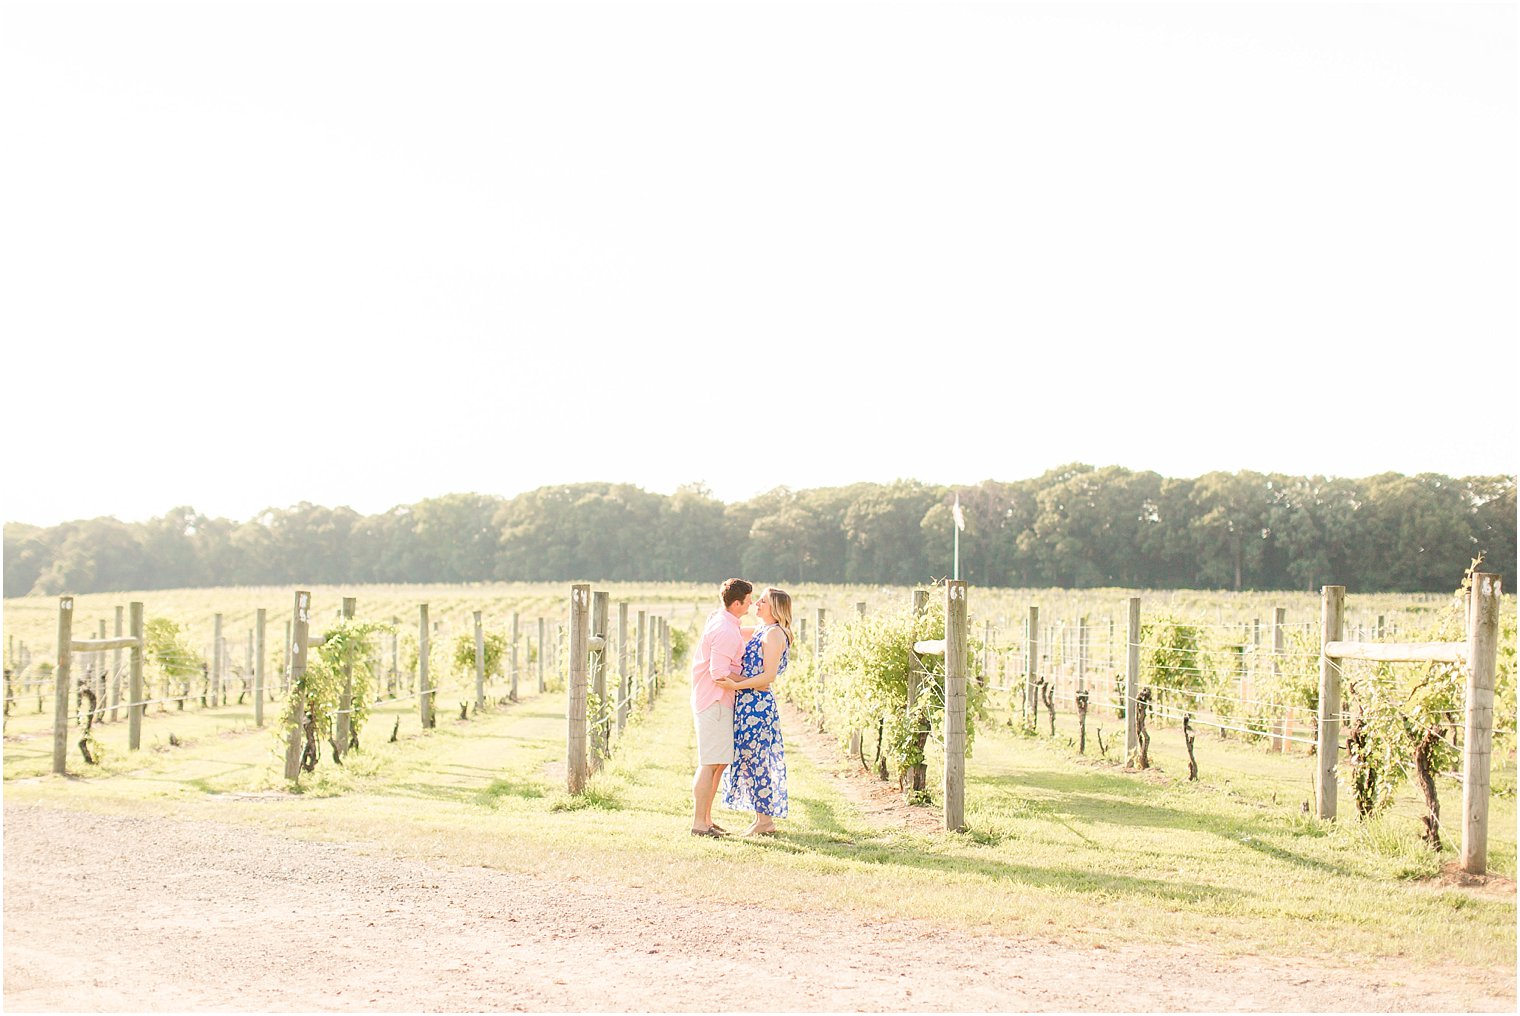 Summer evening engagement session at Laurita Winery in New Egypt NJ